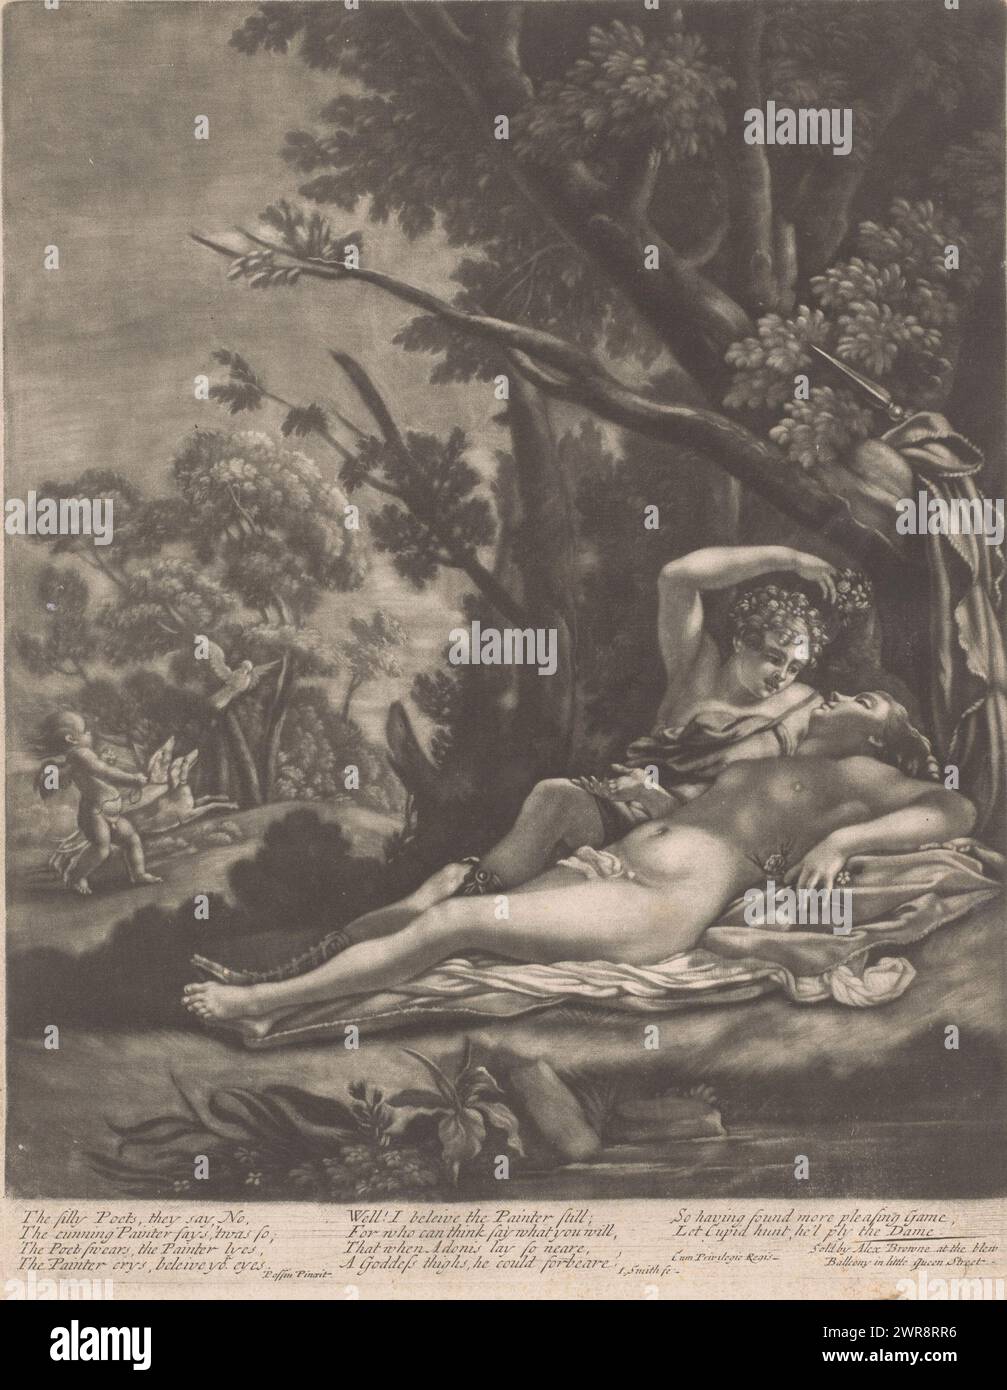 Venus and Adonis, Text in English in the bottom margin., print maker: John Smith (prentmaker/ uitgever), after painting by: Nicolas Poussin, publisher: Alexander Browne, England, 1662 - 1706, paper, height 277 mm × width 218 mm, print Stock Photo